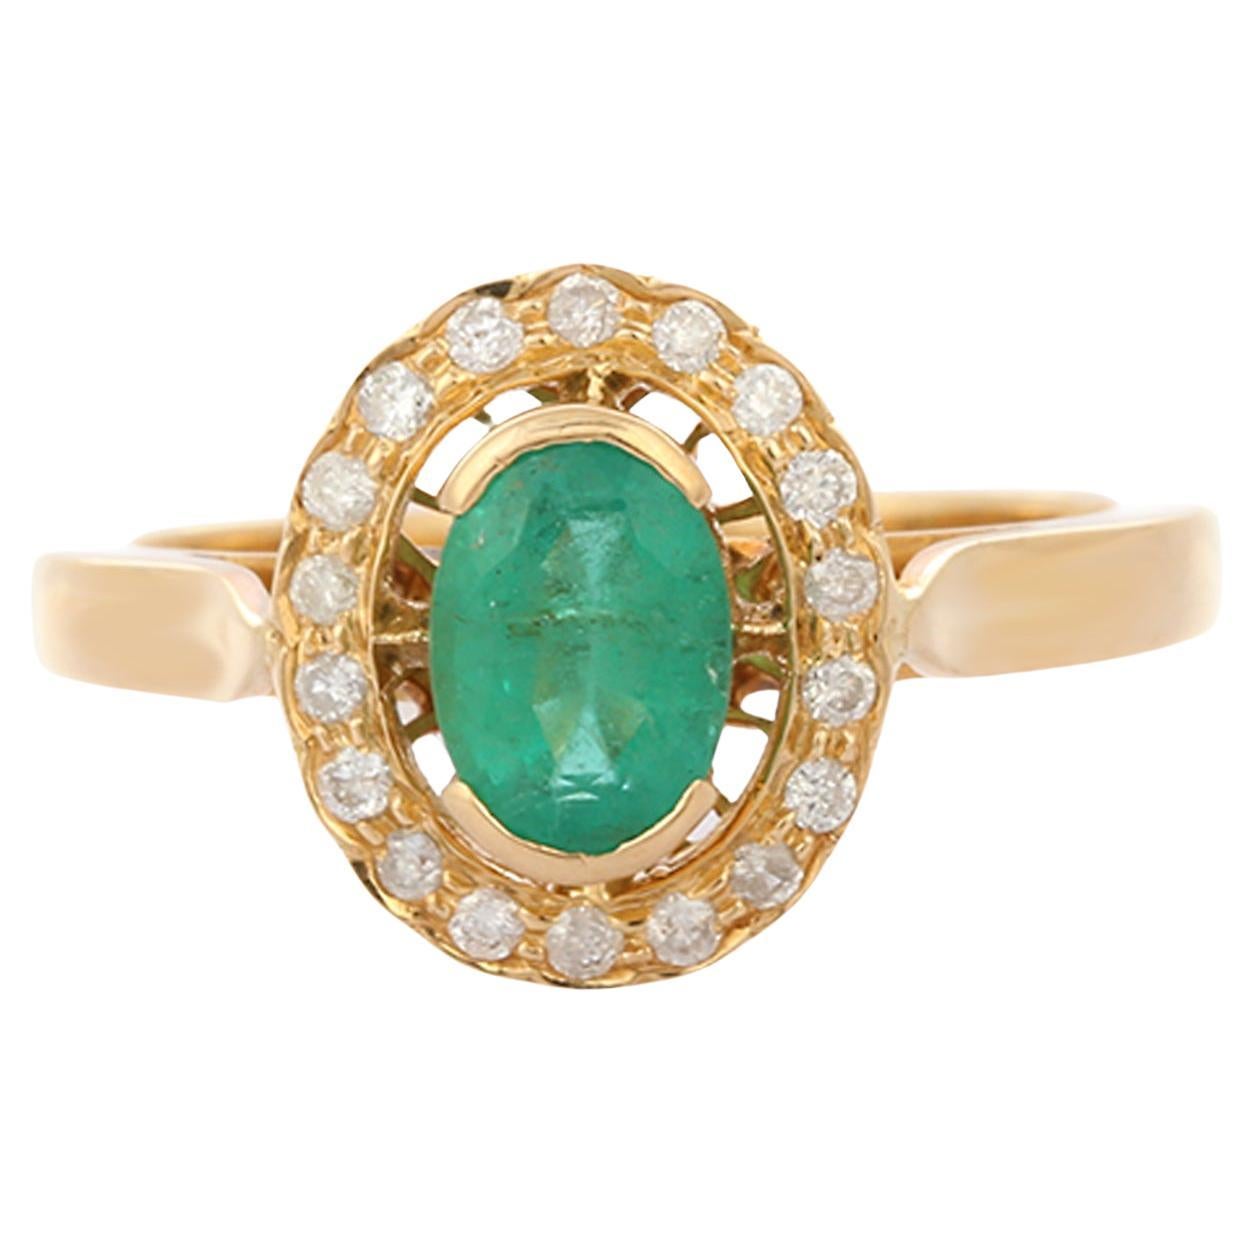 Contemporary Half Bezel Set Emerald and Halo Diamond Ring in 18K Yellow Gold